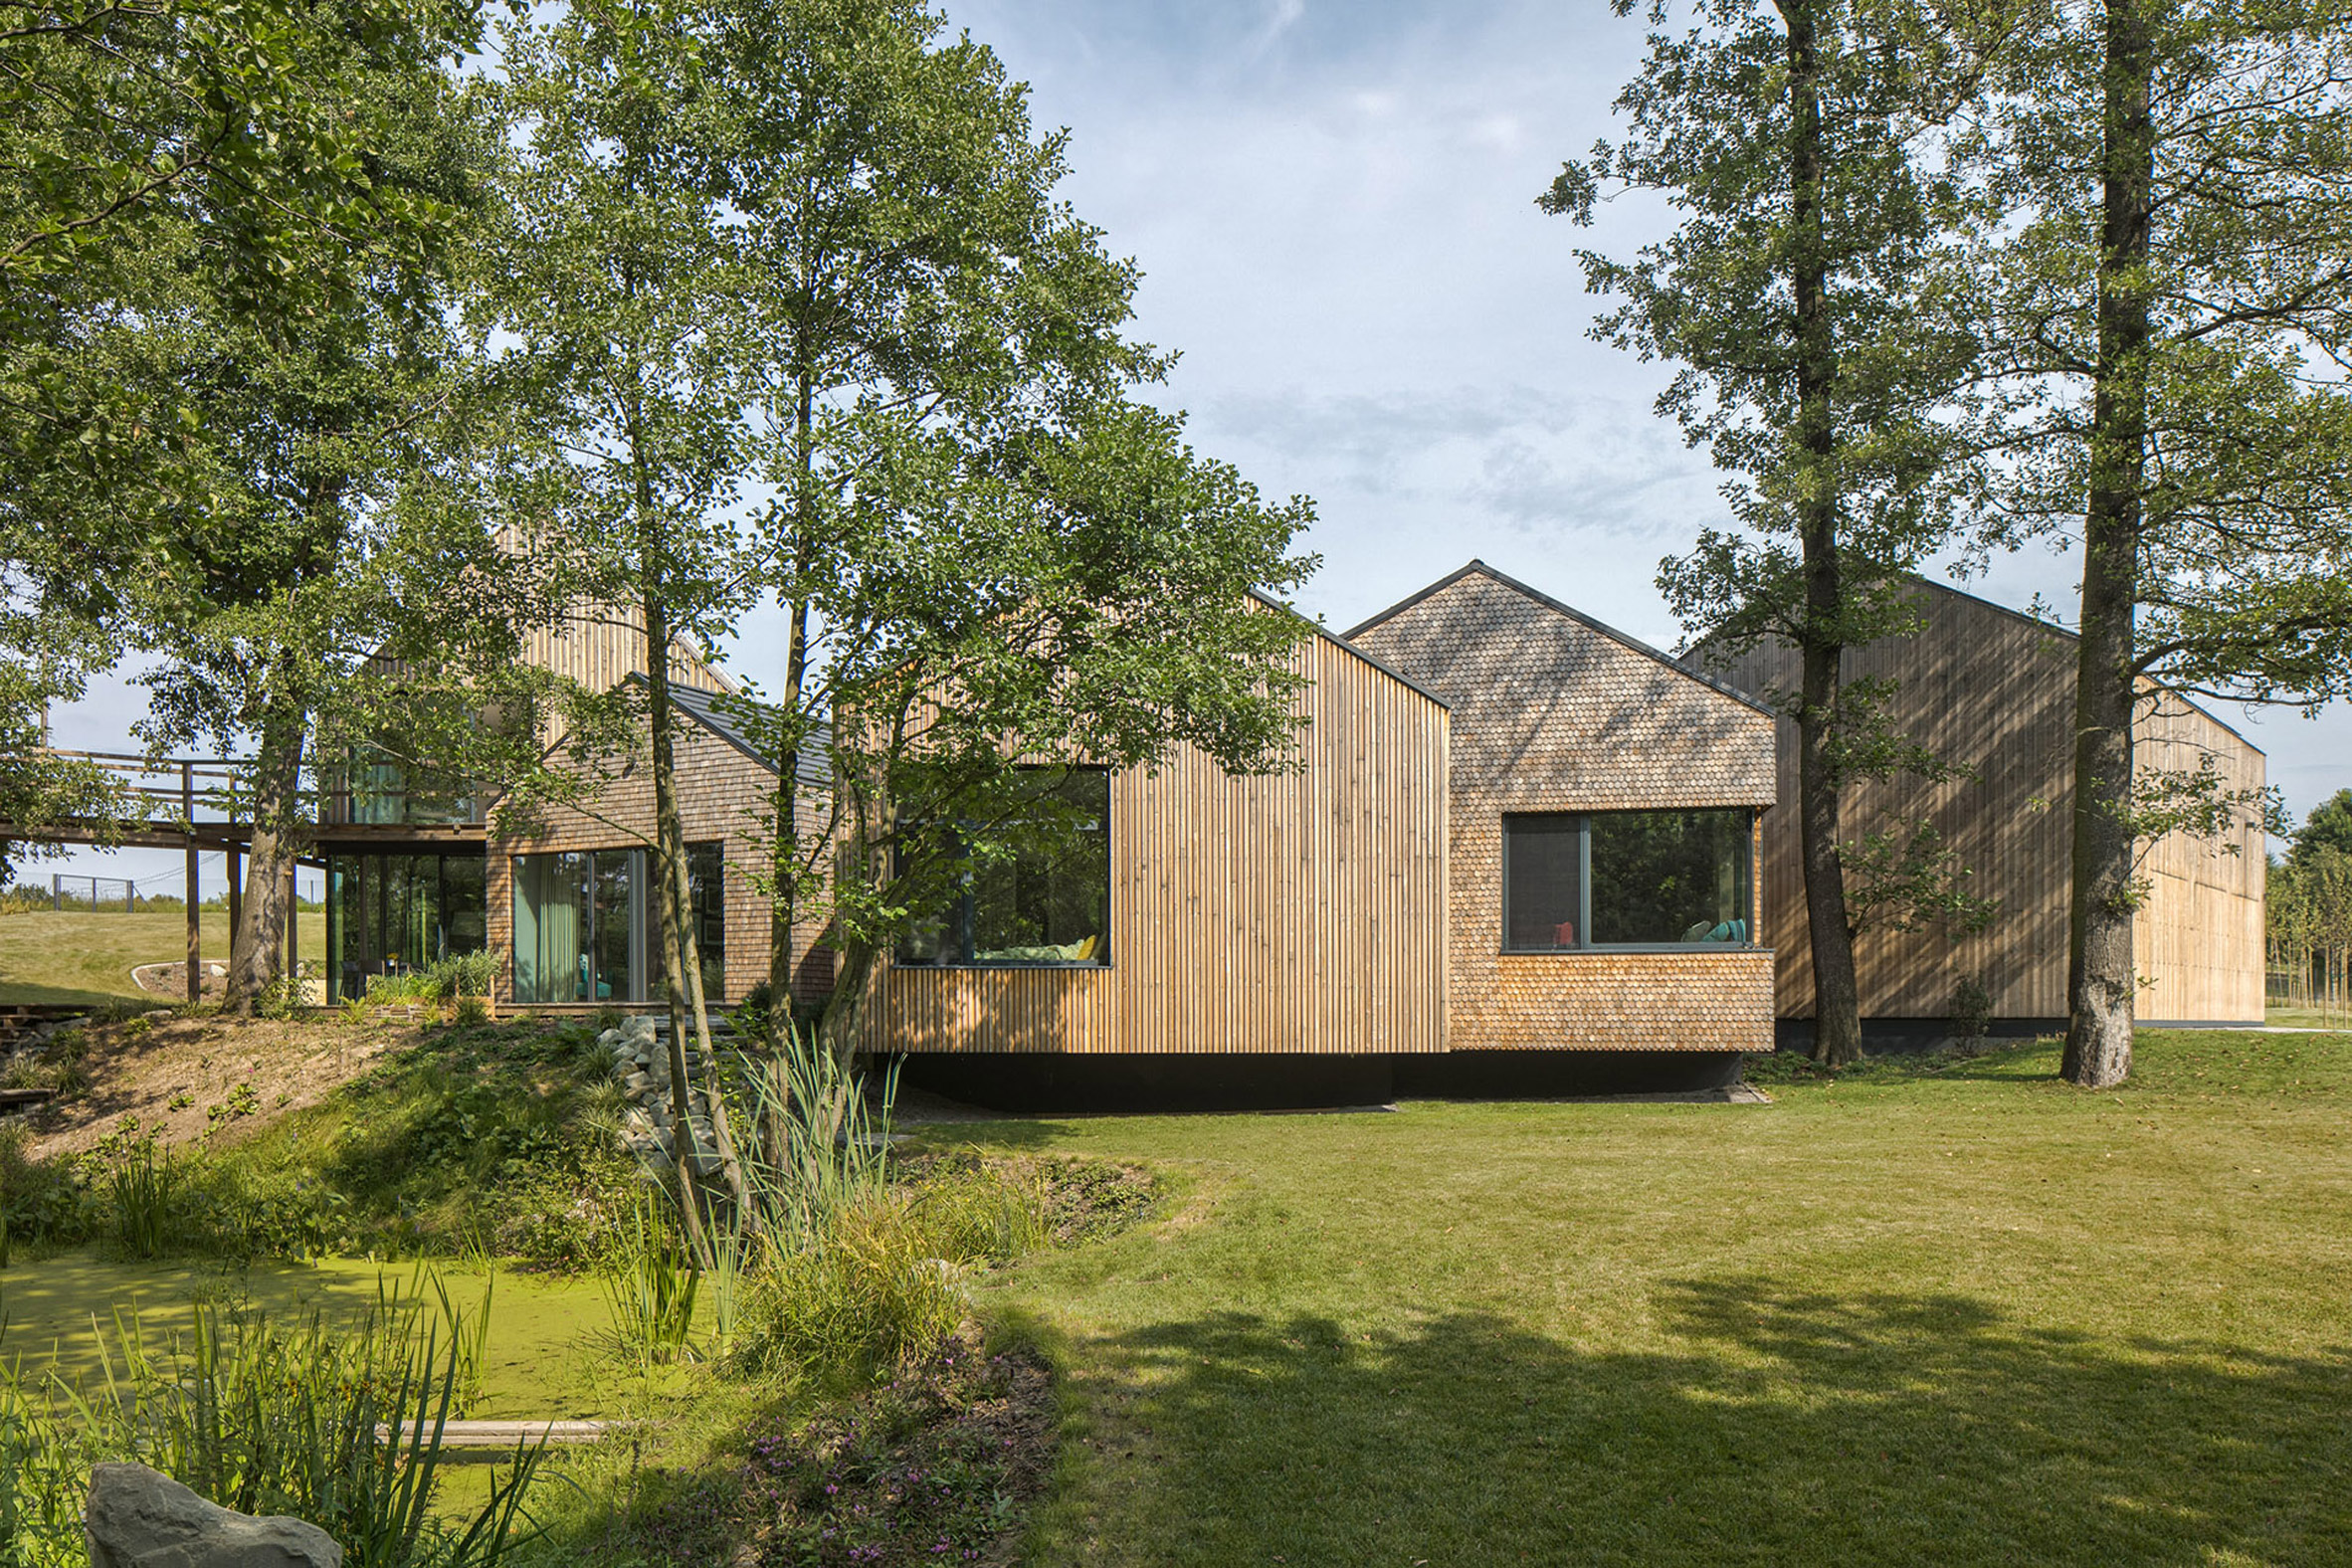 Timber farmhouse with gabled roofs sits in the middle of a green landscape